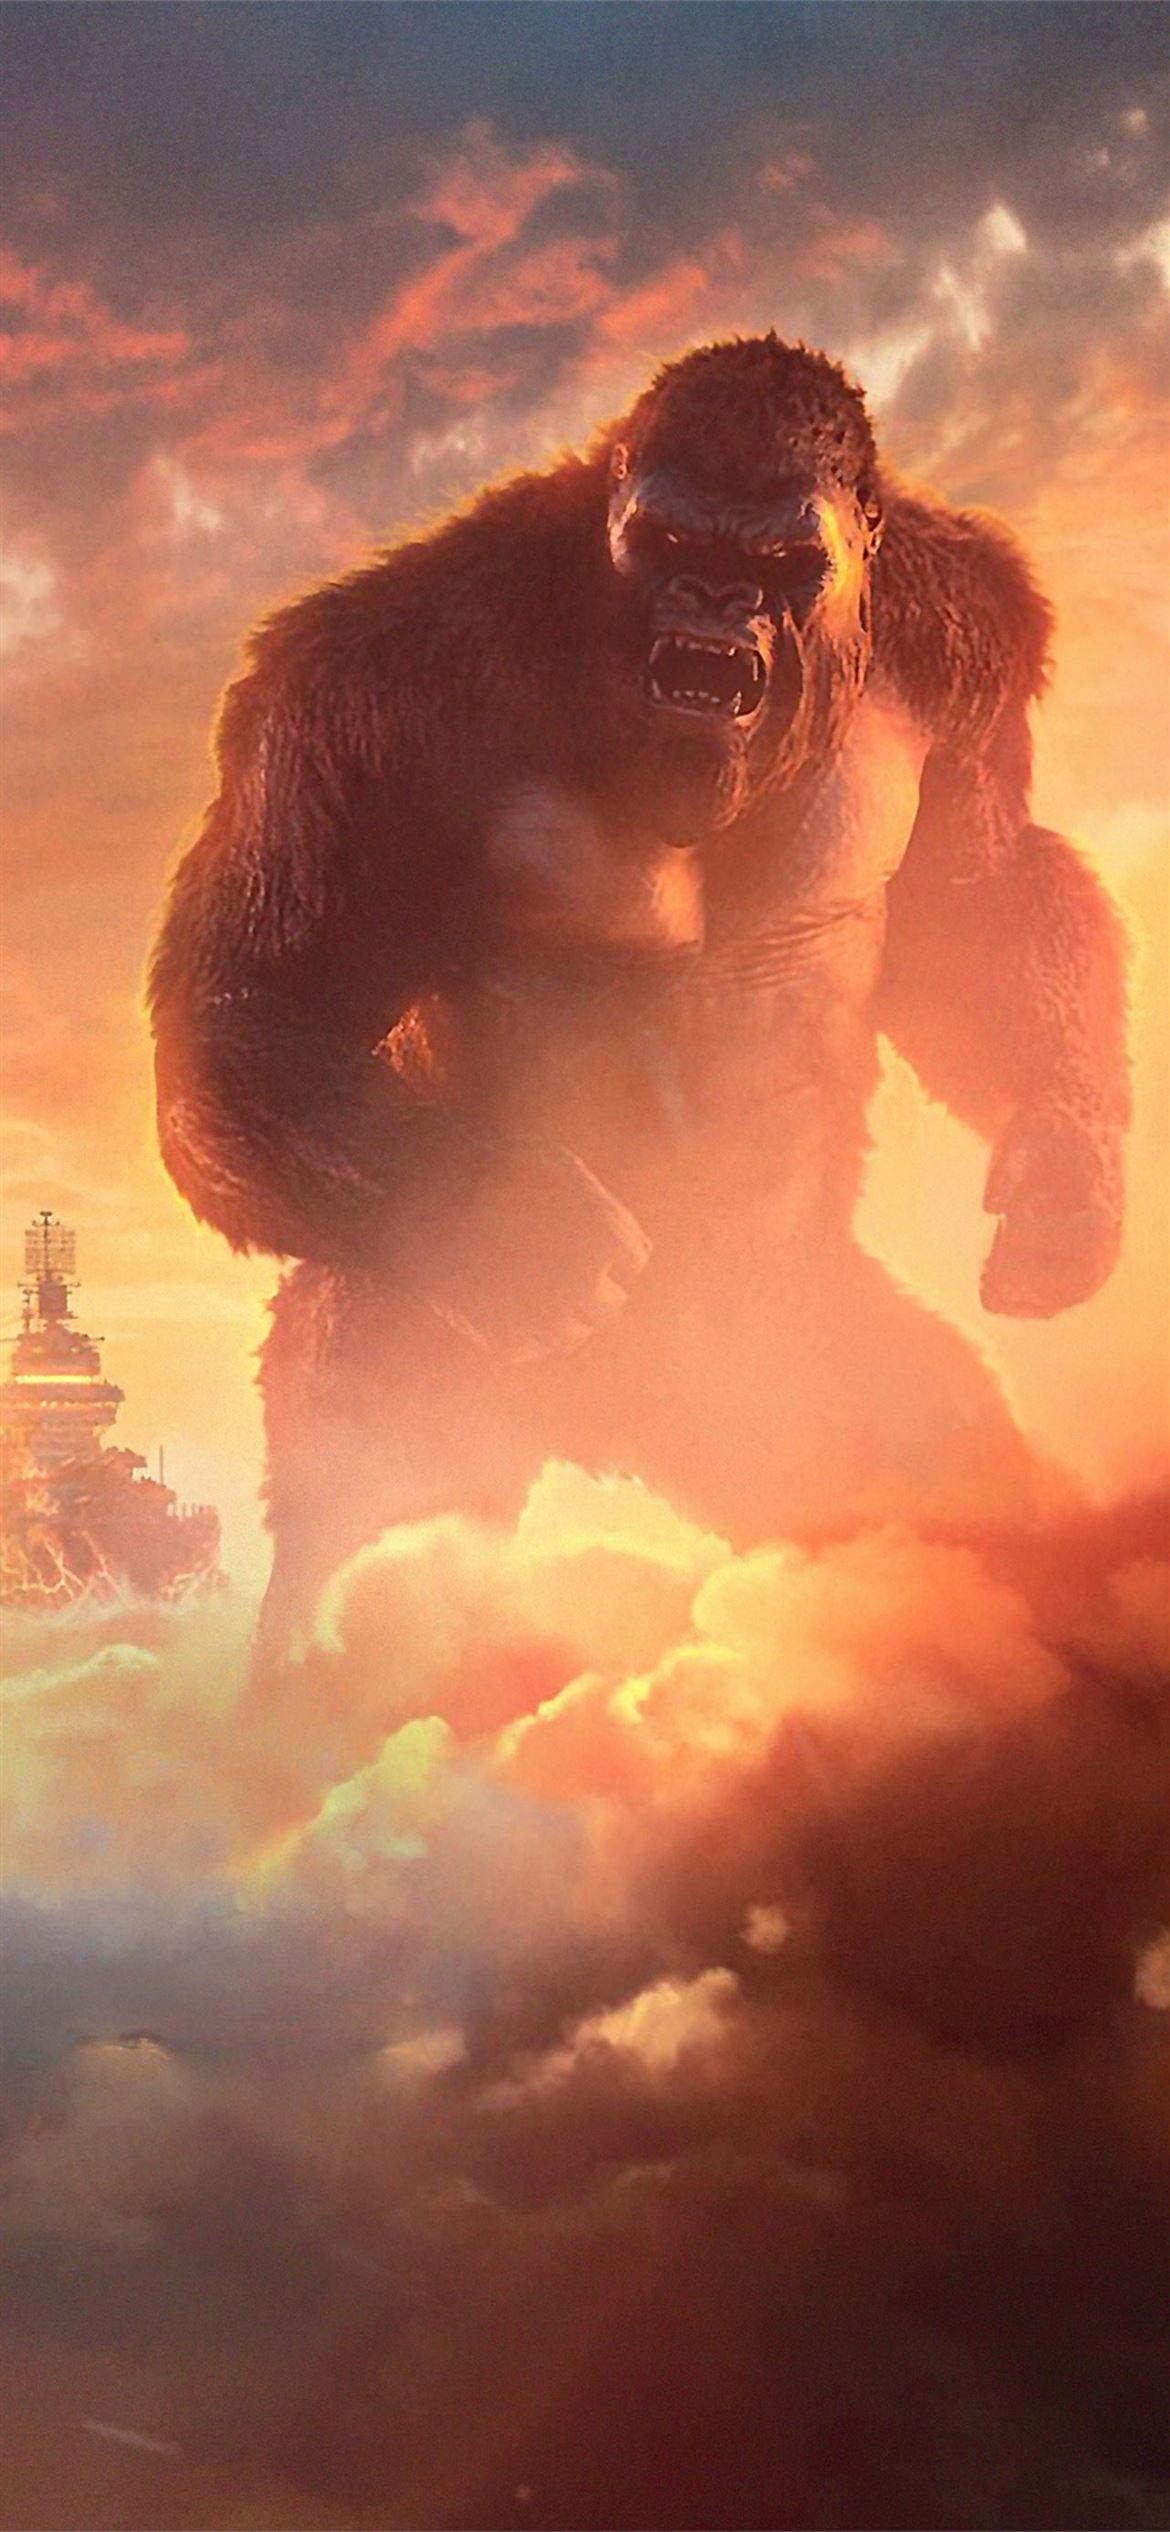 King Kong: A giant ape monster who first appeared in the 1933 RKO Radio Pictures film. 1170x2540 HD Wallpaper.